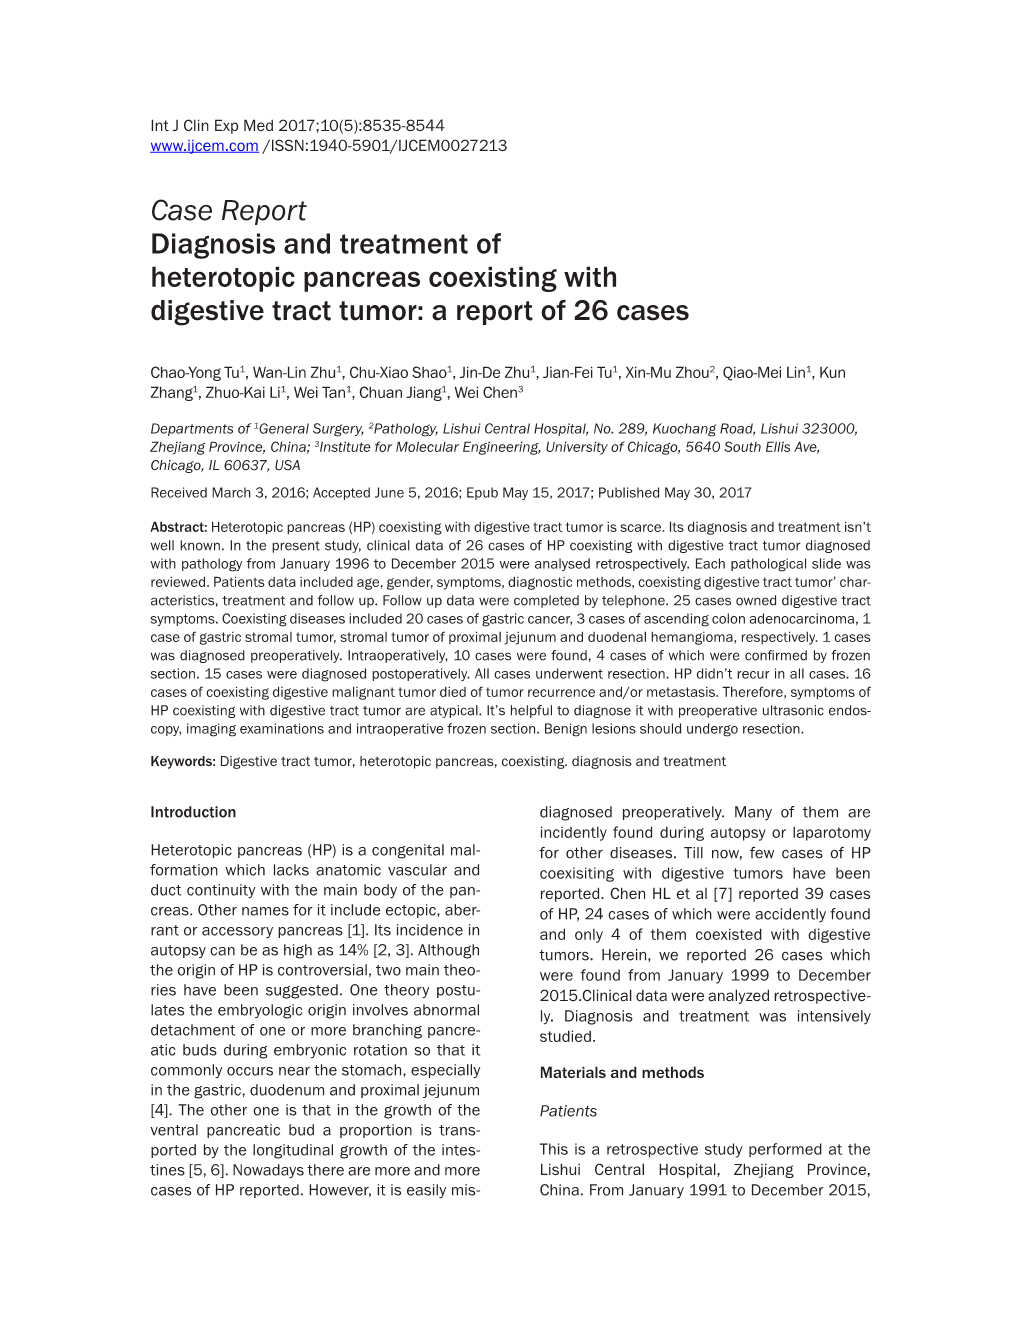 Case Report Diagnosis and Treatment of Heterotopic Pancreas Coexisting with Digestive Tract Tumor: a Report of 26 Cases